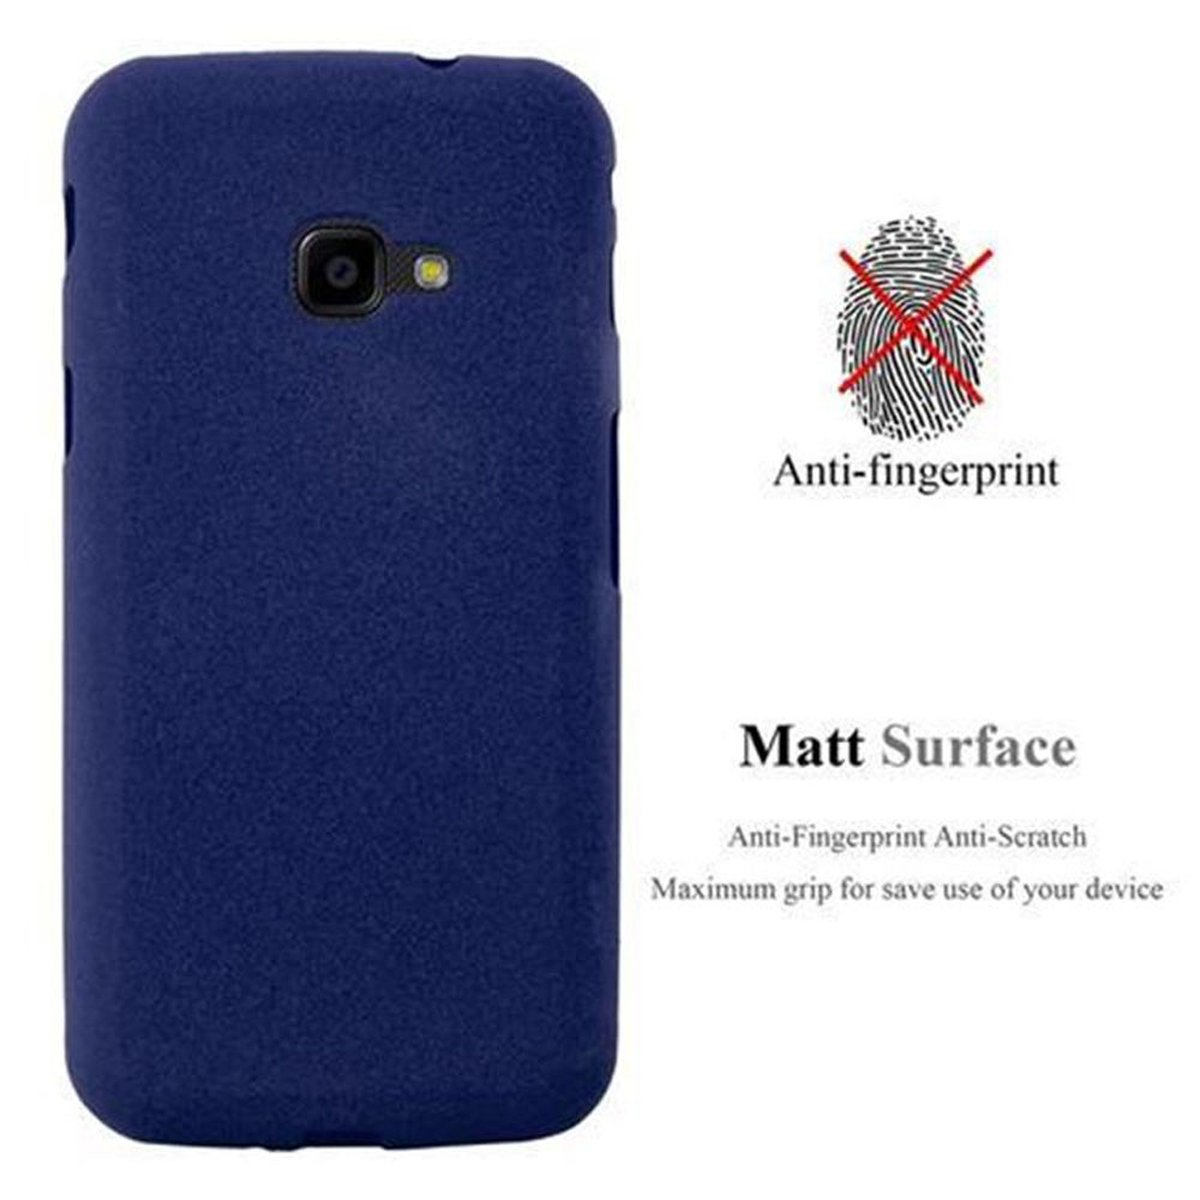 / Galaxy Backcover, XCover Frosted 4s, XCover Schutzhülle, FROST BLAU TPU 4 DUNKEL Samsung, CADORABO